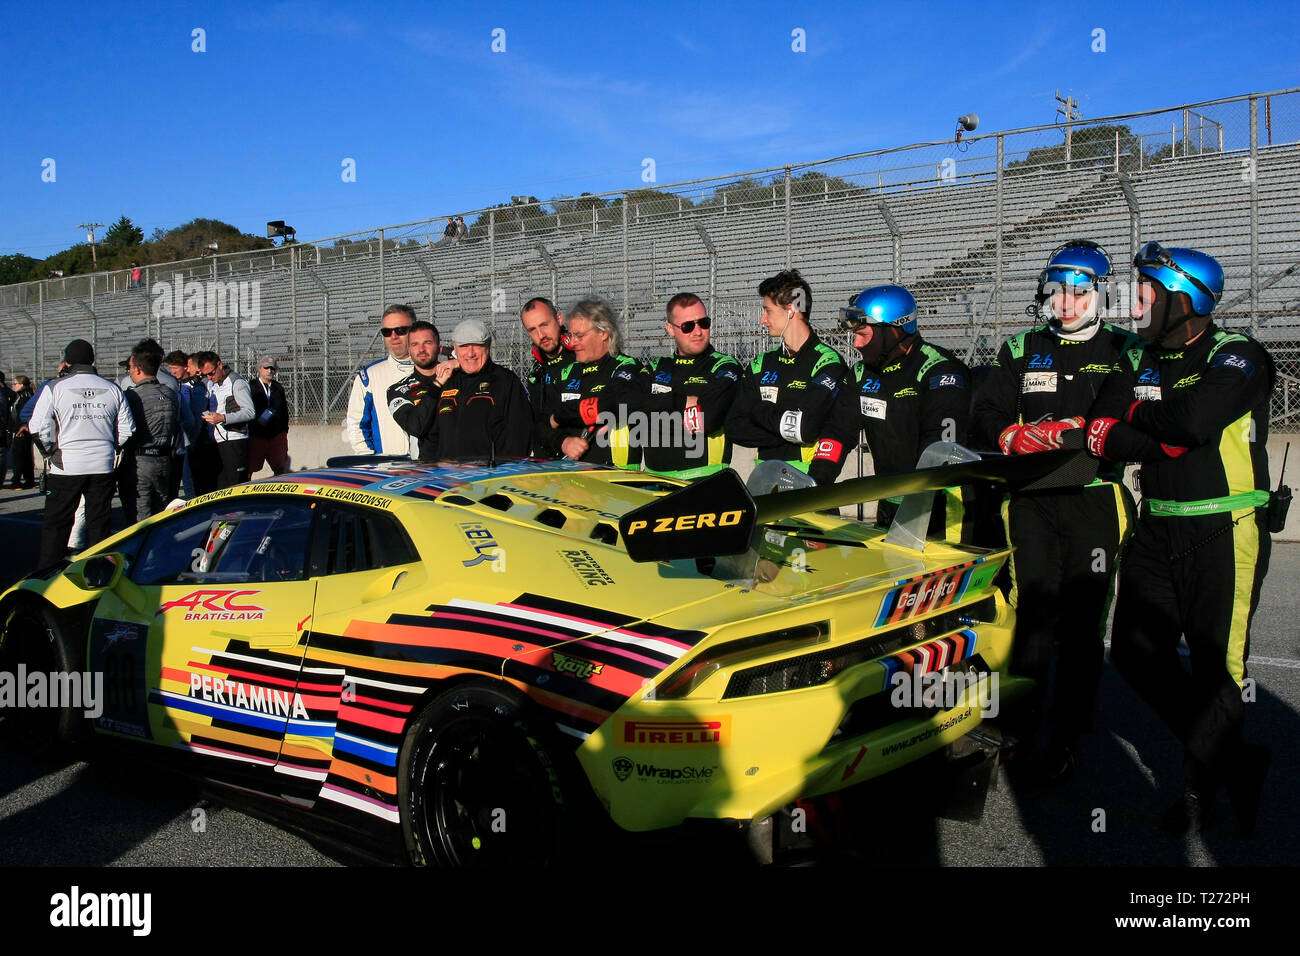 Laguna Seca Raceway, Monterey, USA30th March, 2019 WeatherTech Laguna Seca Raceway, Monterey, CA., USA  Action during the early styages of  the Intercontinental GT Challenge Series, 8 hour race at the USA's most iconic racetrack Stock Photo